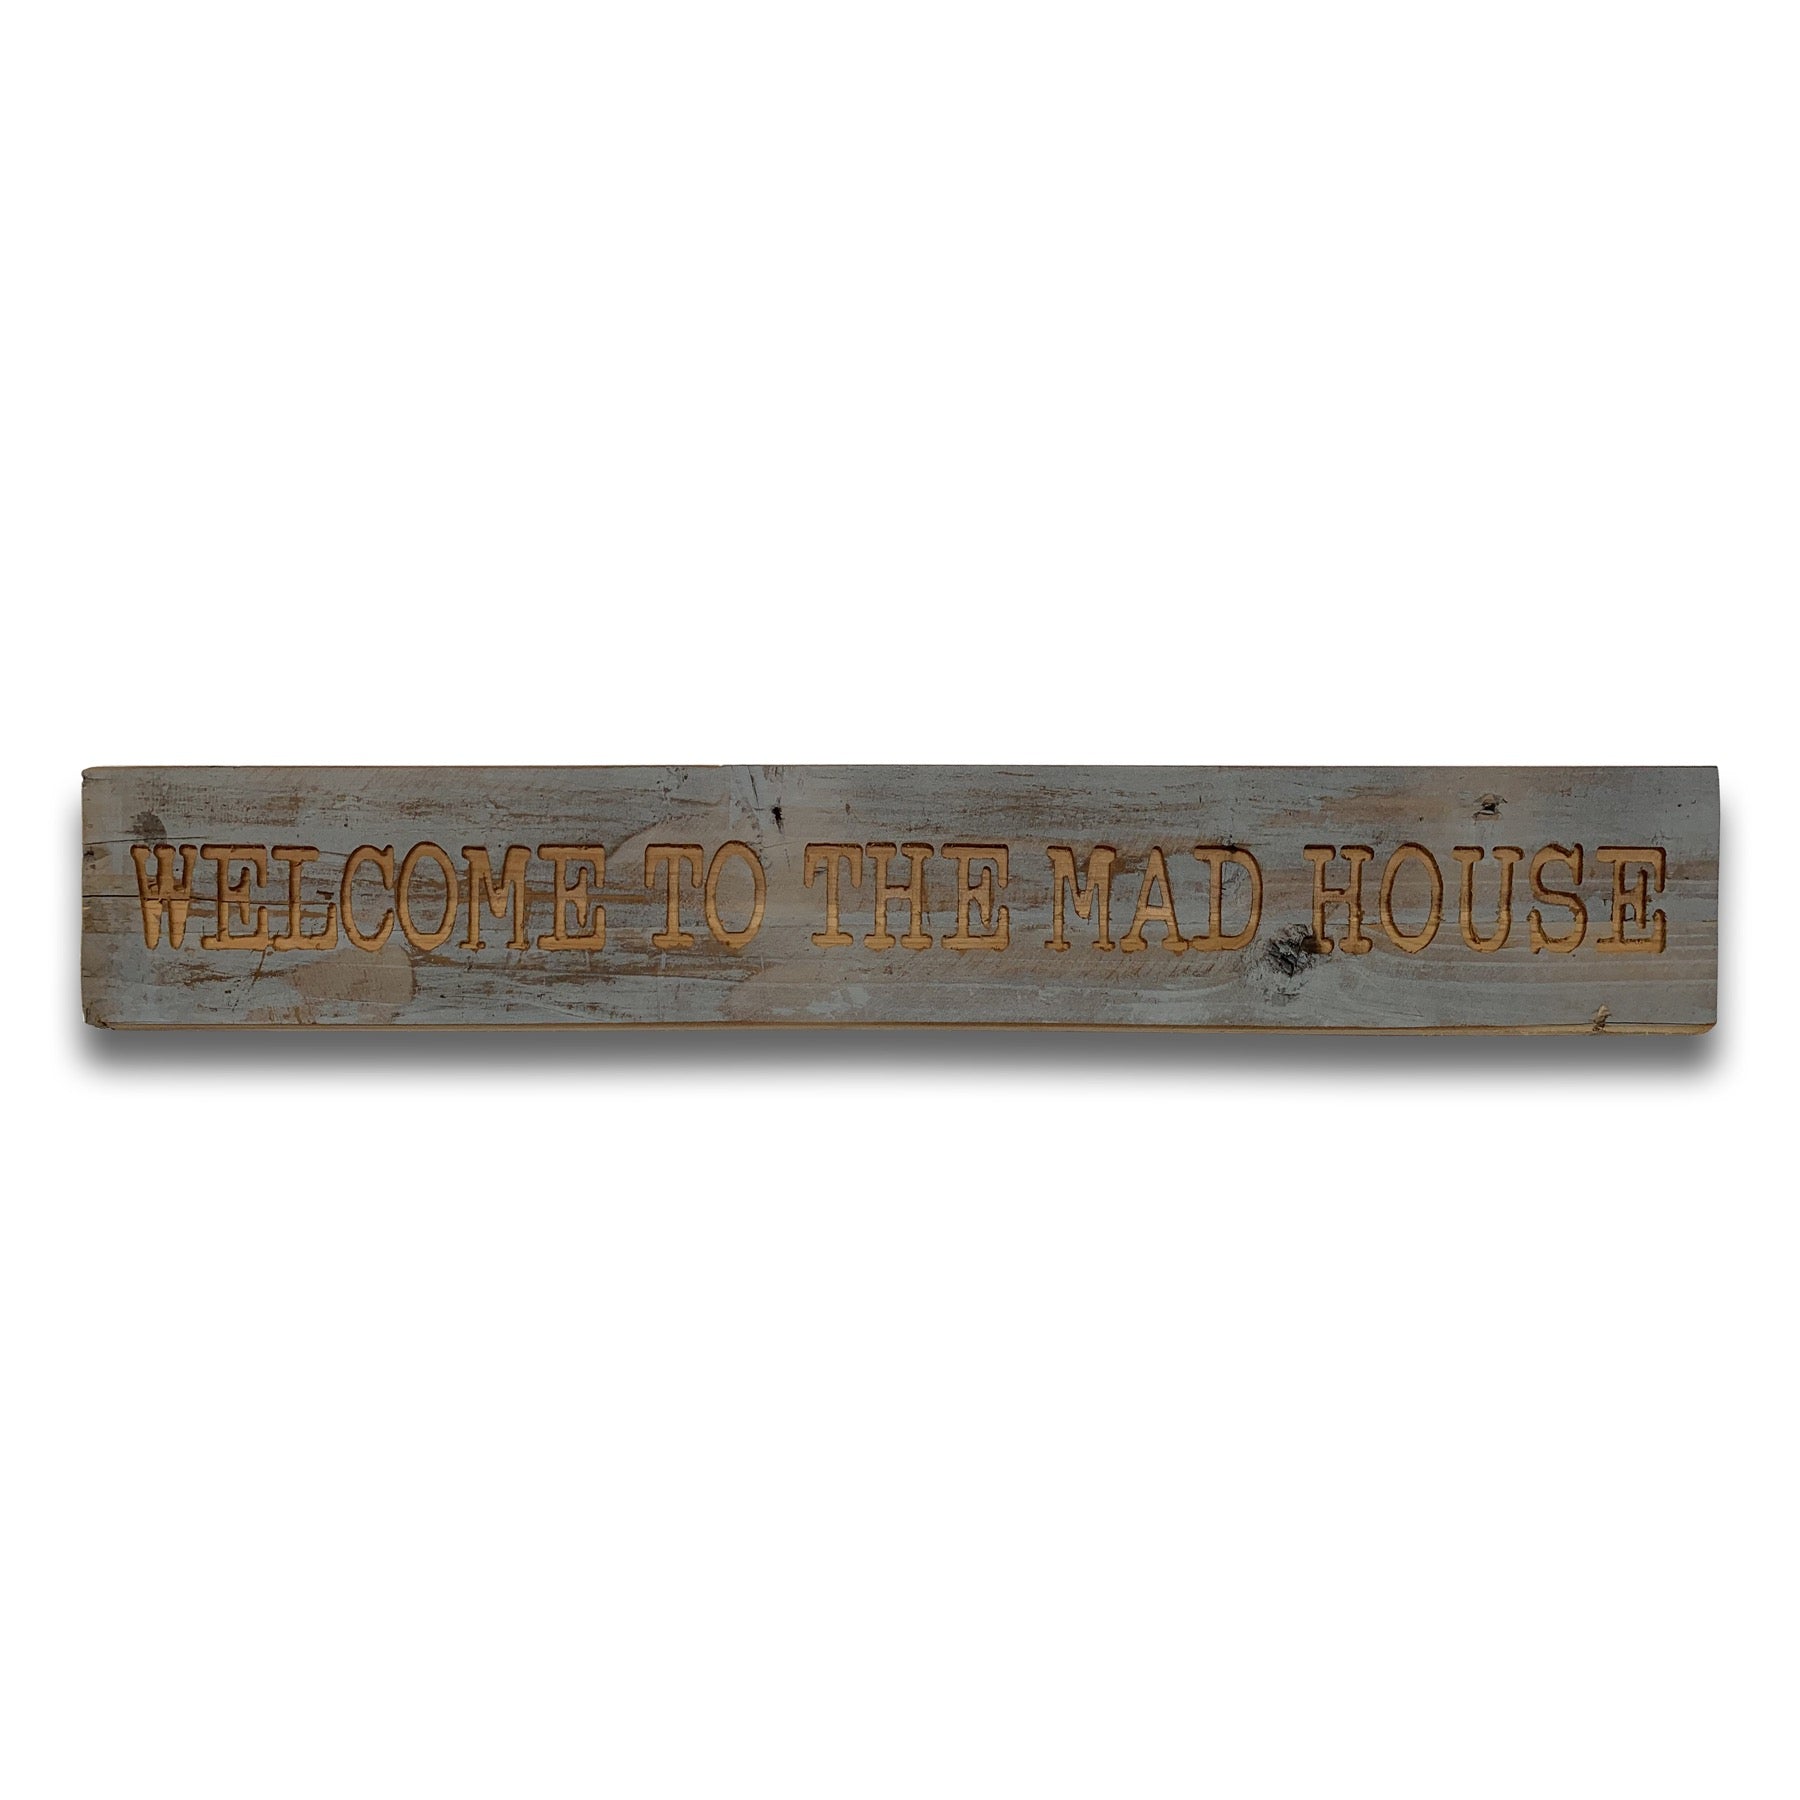 Welcome to the Mad House wooden sign